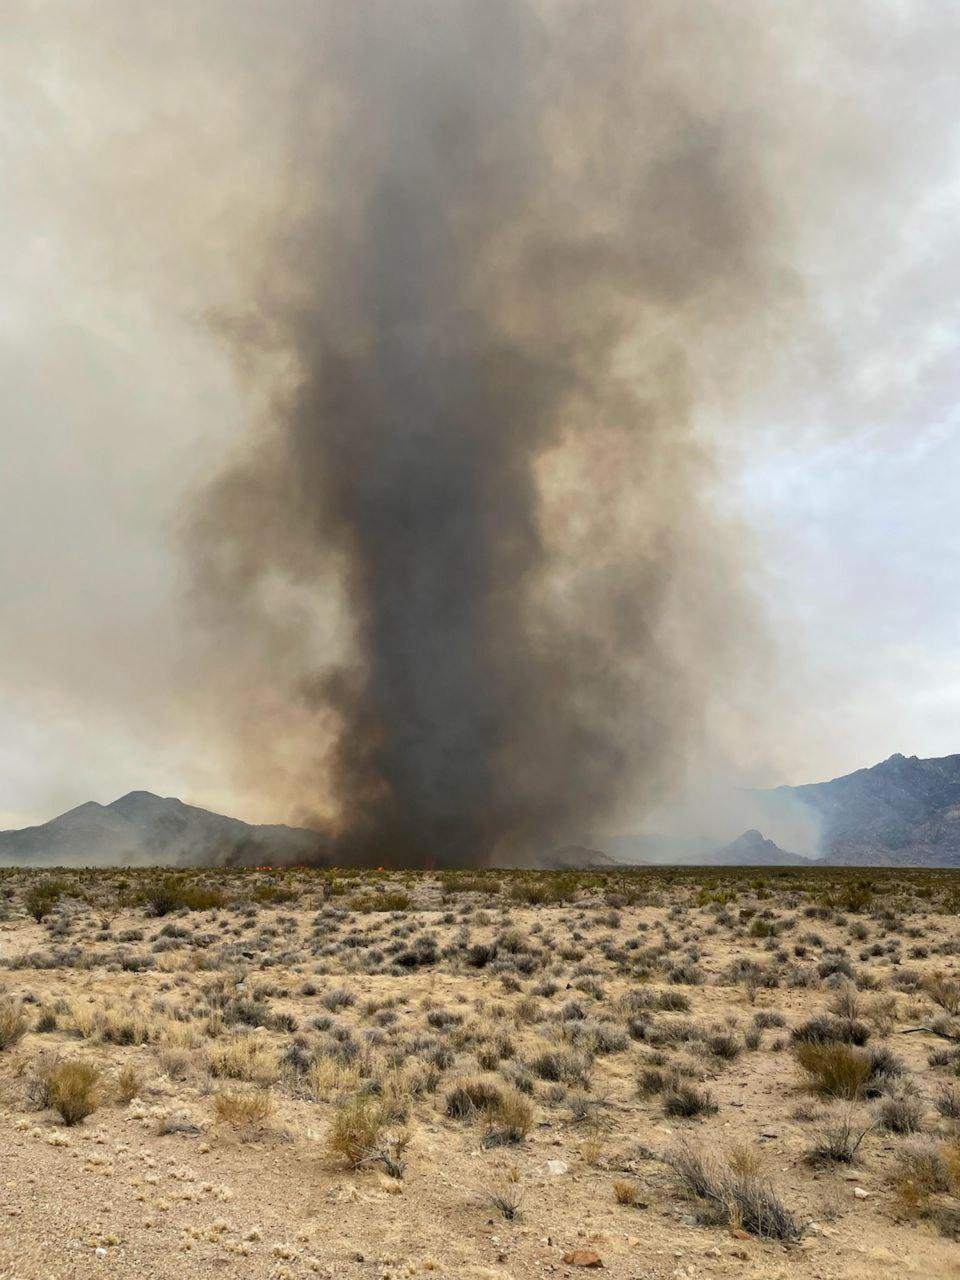 In this photo provided by the National Park Service, is a large fire whirl at the York Fire in the Mojave National Preserve, Calif., Sunday, July 30, 2023. A massive wildfire burning out of control in California's Mojave National Preserve was spreading rapidly amid erratic winds, while firefighters reported progress against another major blaze to the southwest that prompted evacuations. (National Park Service via AP)